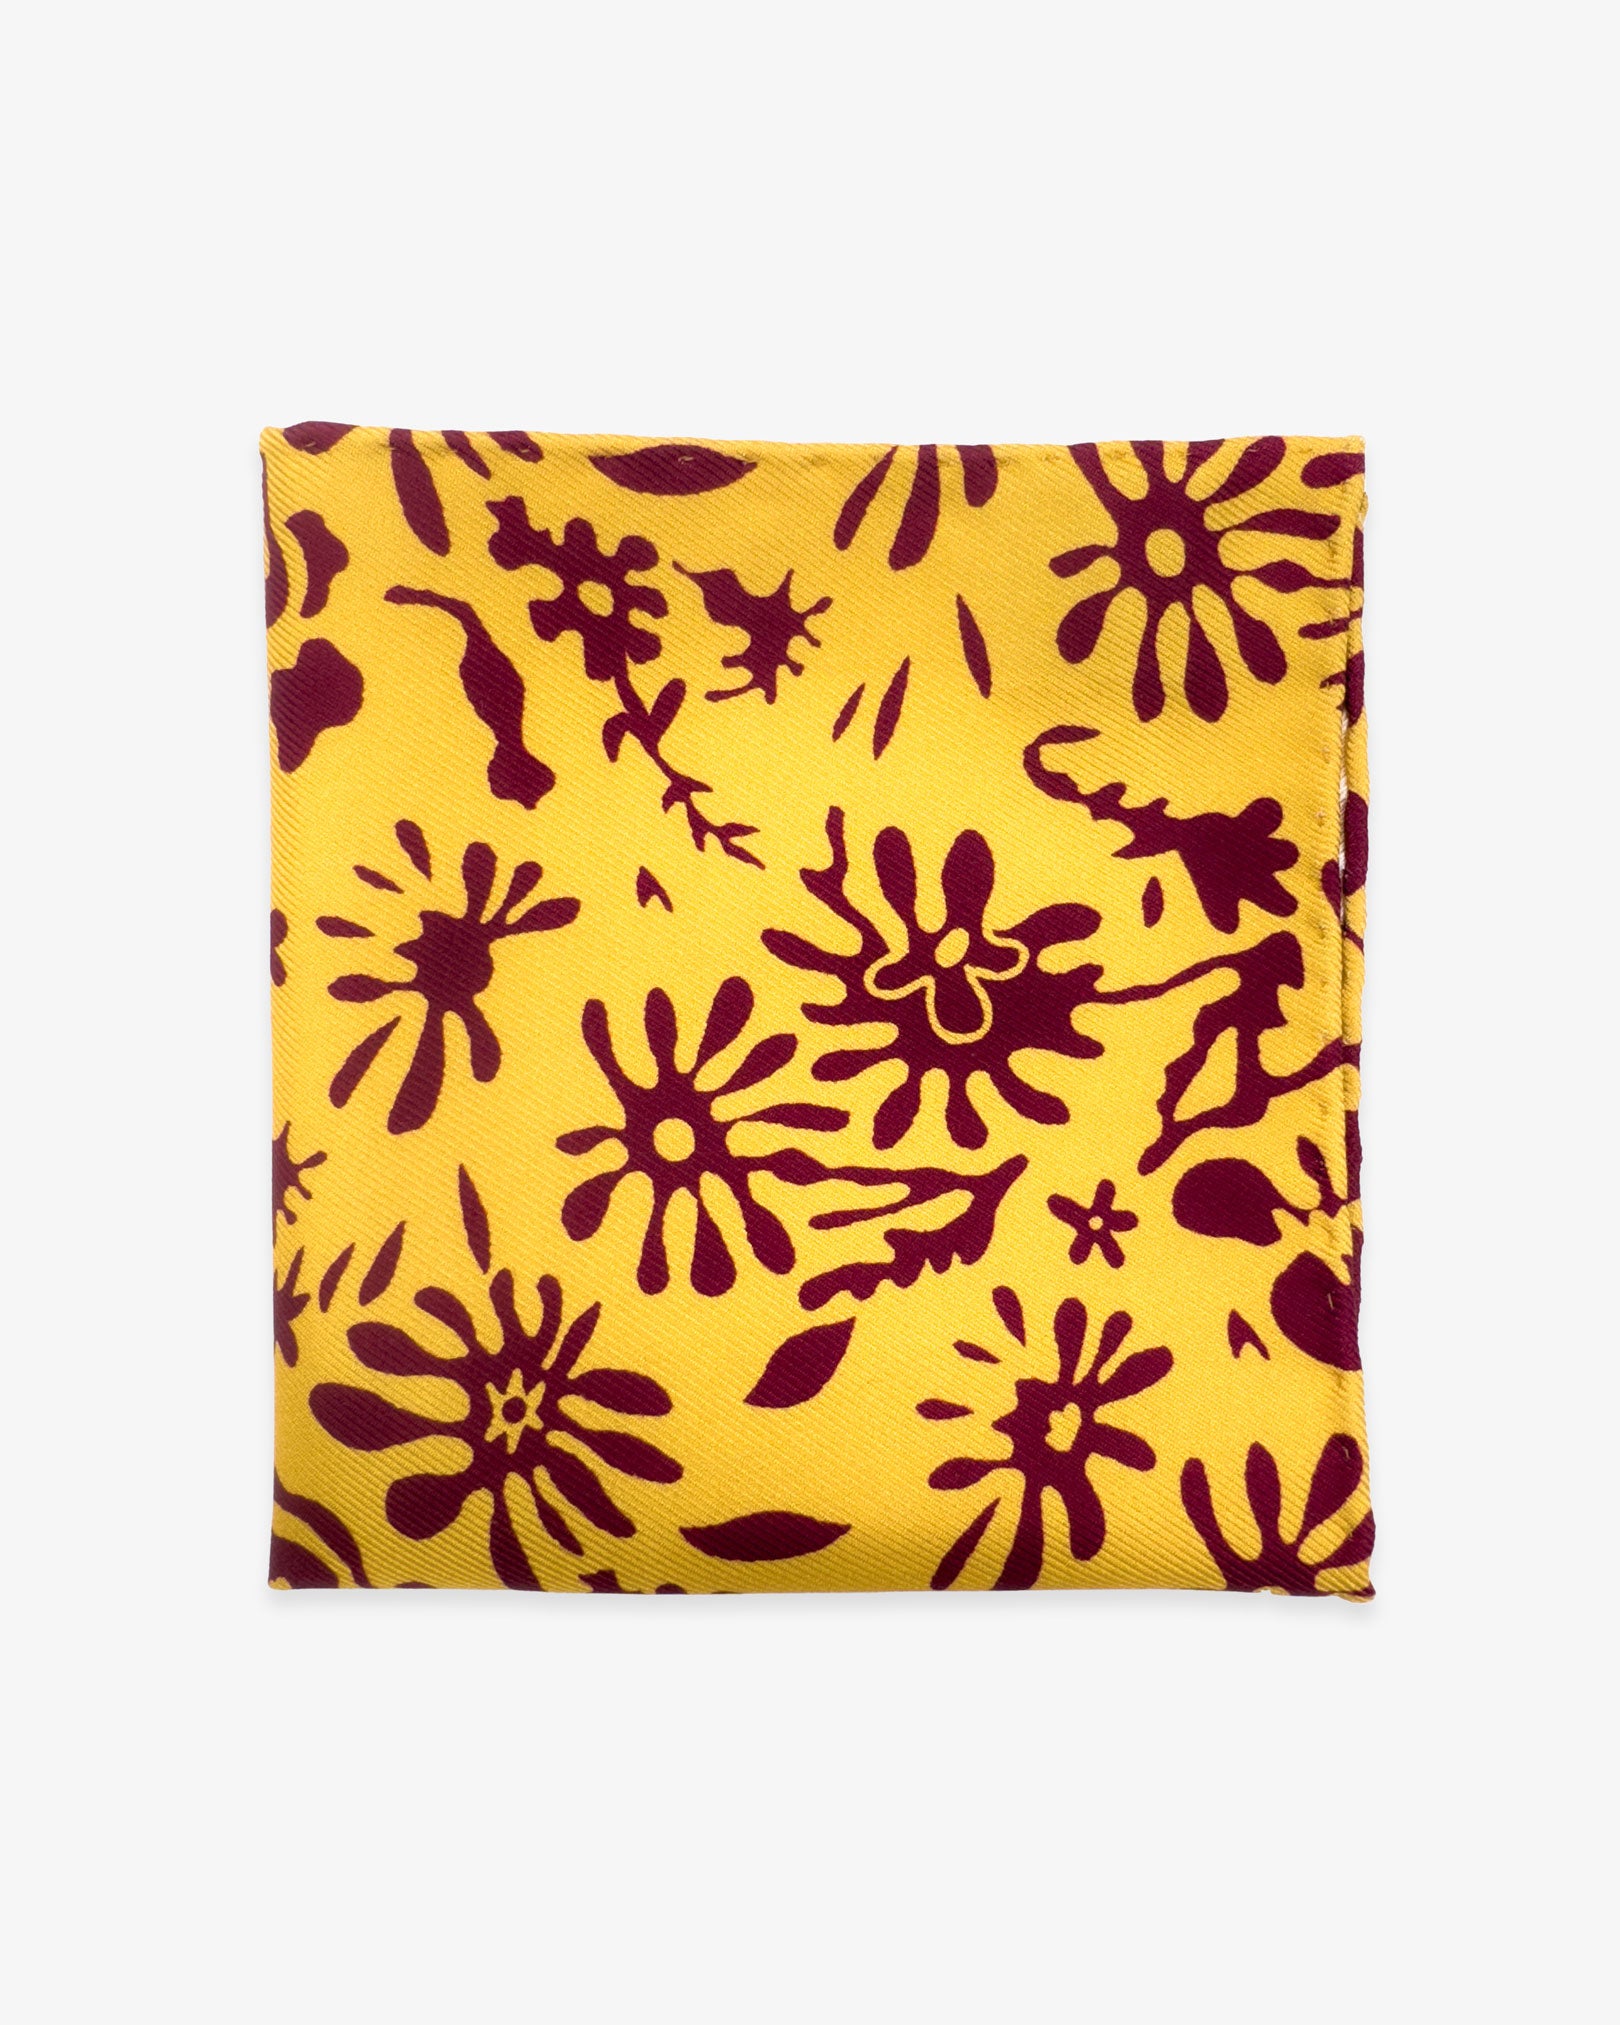 The 'Blenheim' silk pocket square from SOHO Scarves UK collection. Folded into a quarter, showing the organic maroon patterns against a bright yellow ground.